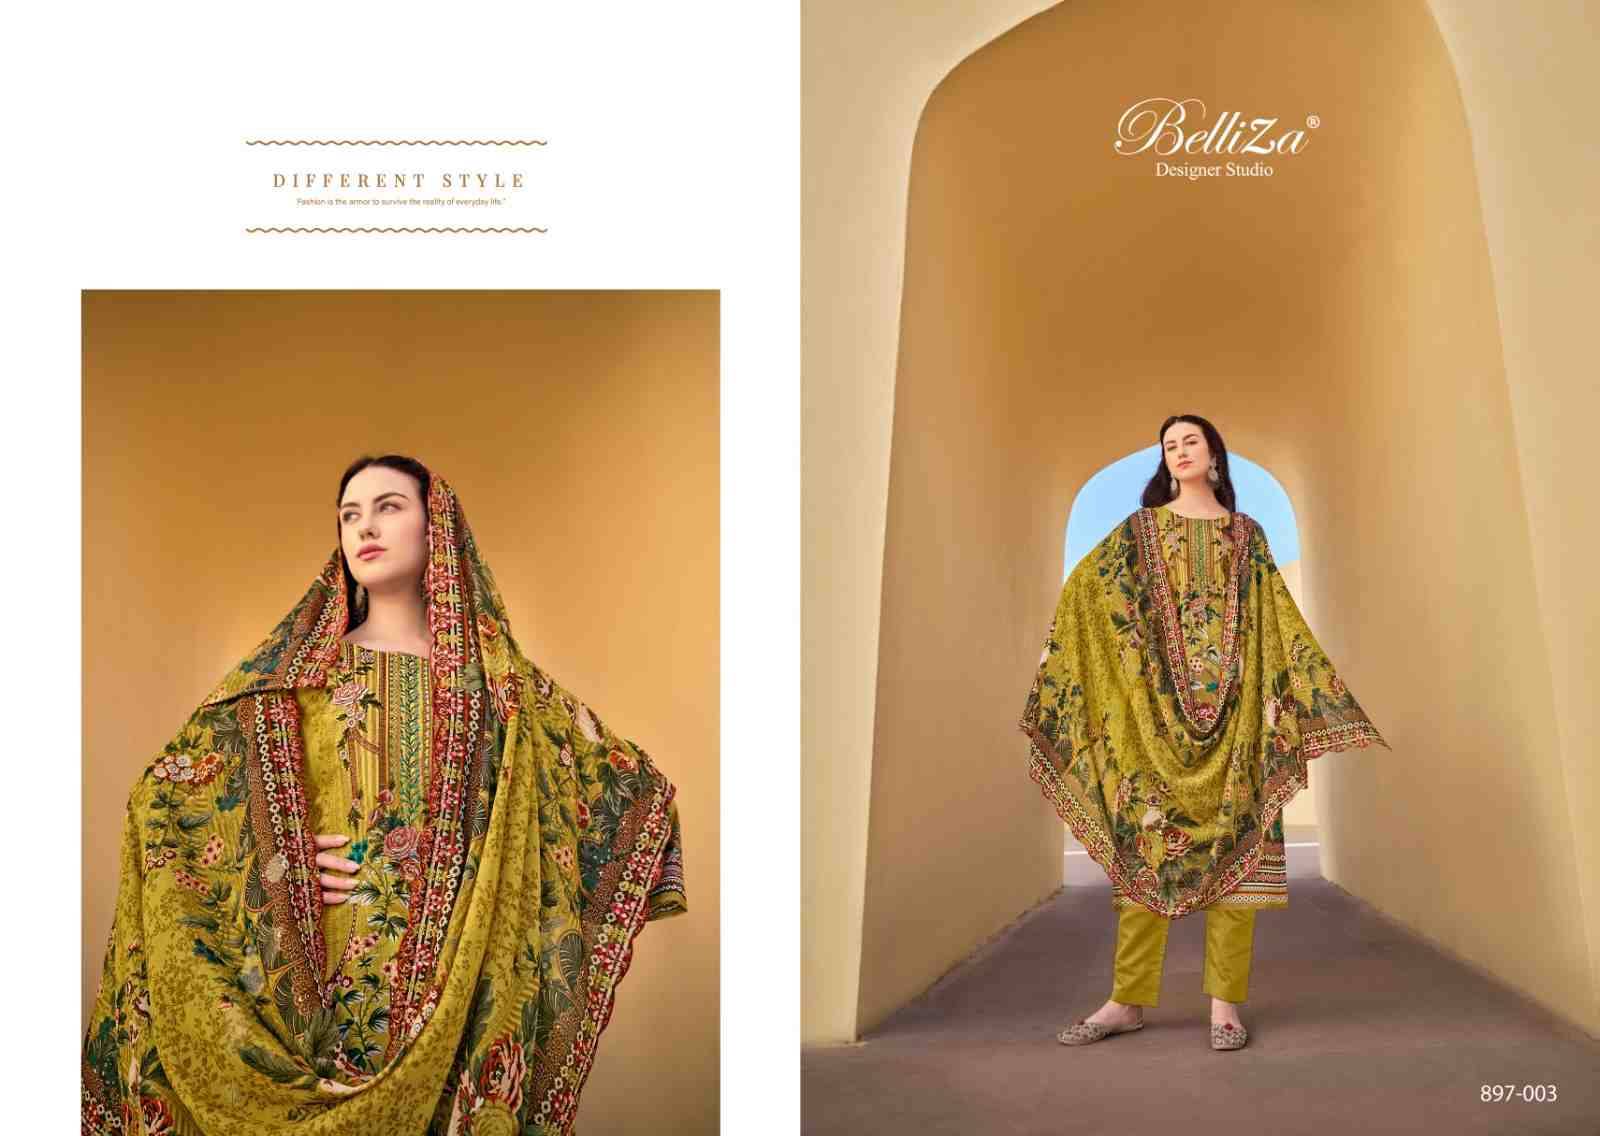 Guzarish Vol-5 By Belliza 897-001 To 897-008 Series Beautiful Stylish Festive Suits Fancy Colorful Casual Wear & Ethnic Wear & Ready To Wear Pure Cotton Digital Print Dresses At Wholesale Price